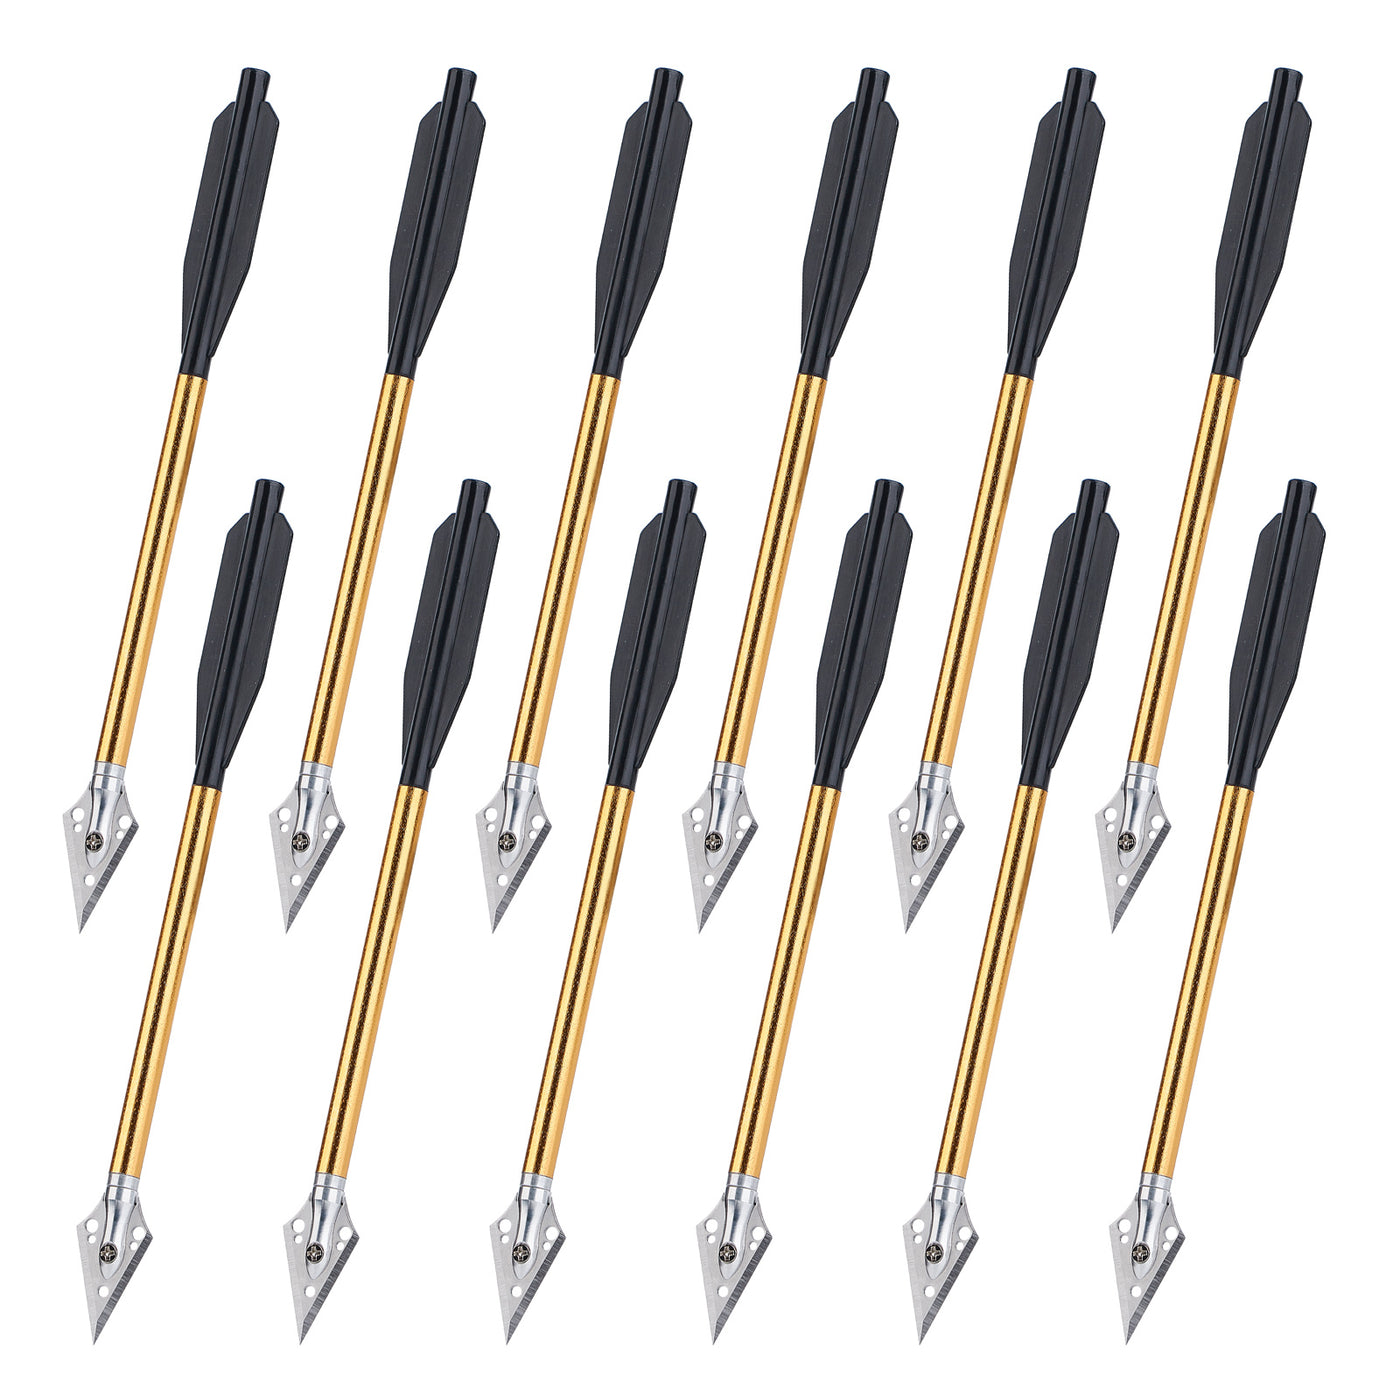 12x 6.5 Aluminum Crossbow Bolts Arrows Replaceable Steel Tips